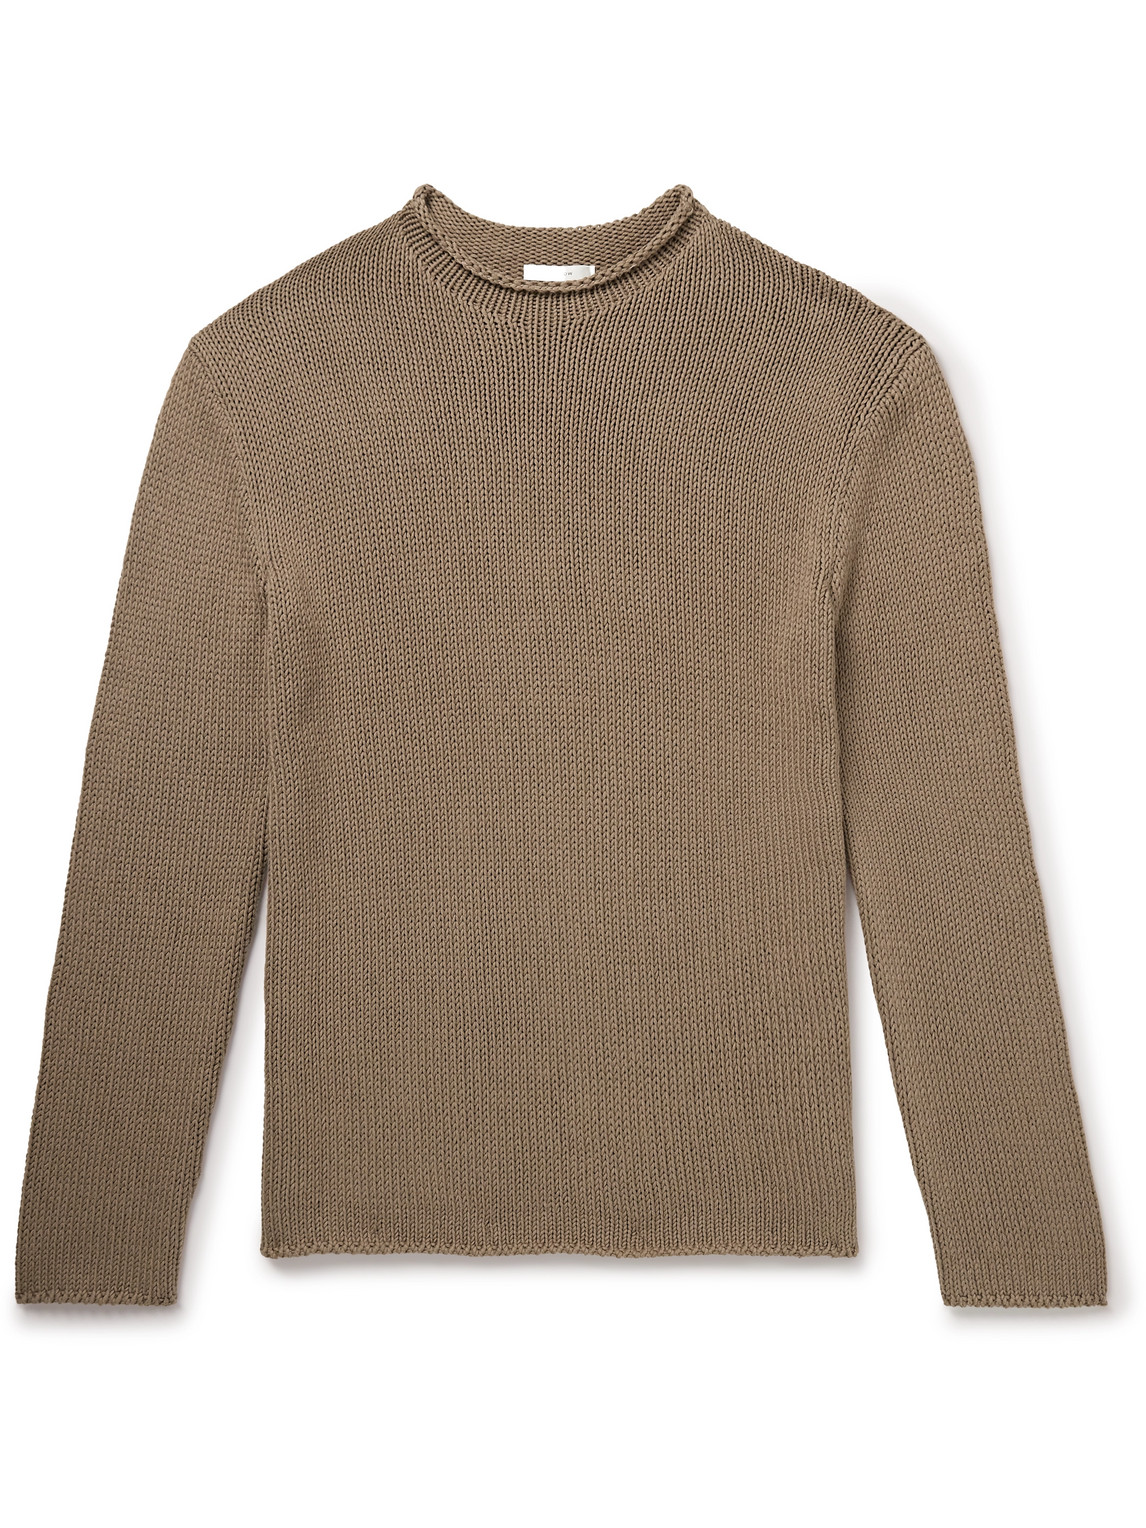 The Row - Anteo Cotton and Cashmere-Blend Sweater - Men - Brown - M von The Row